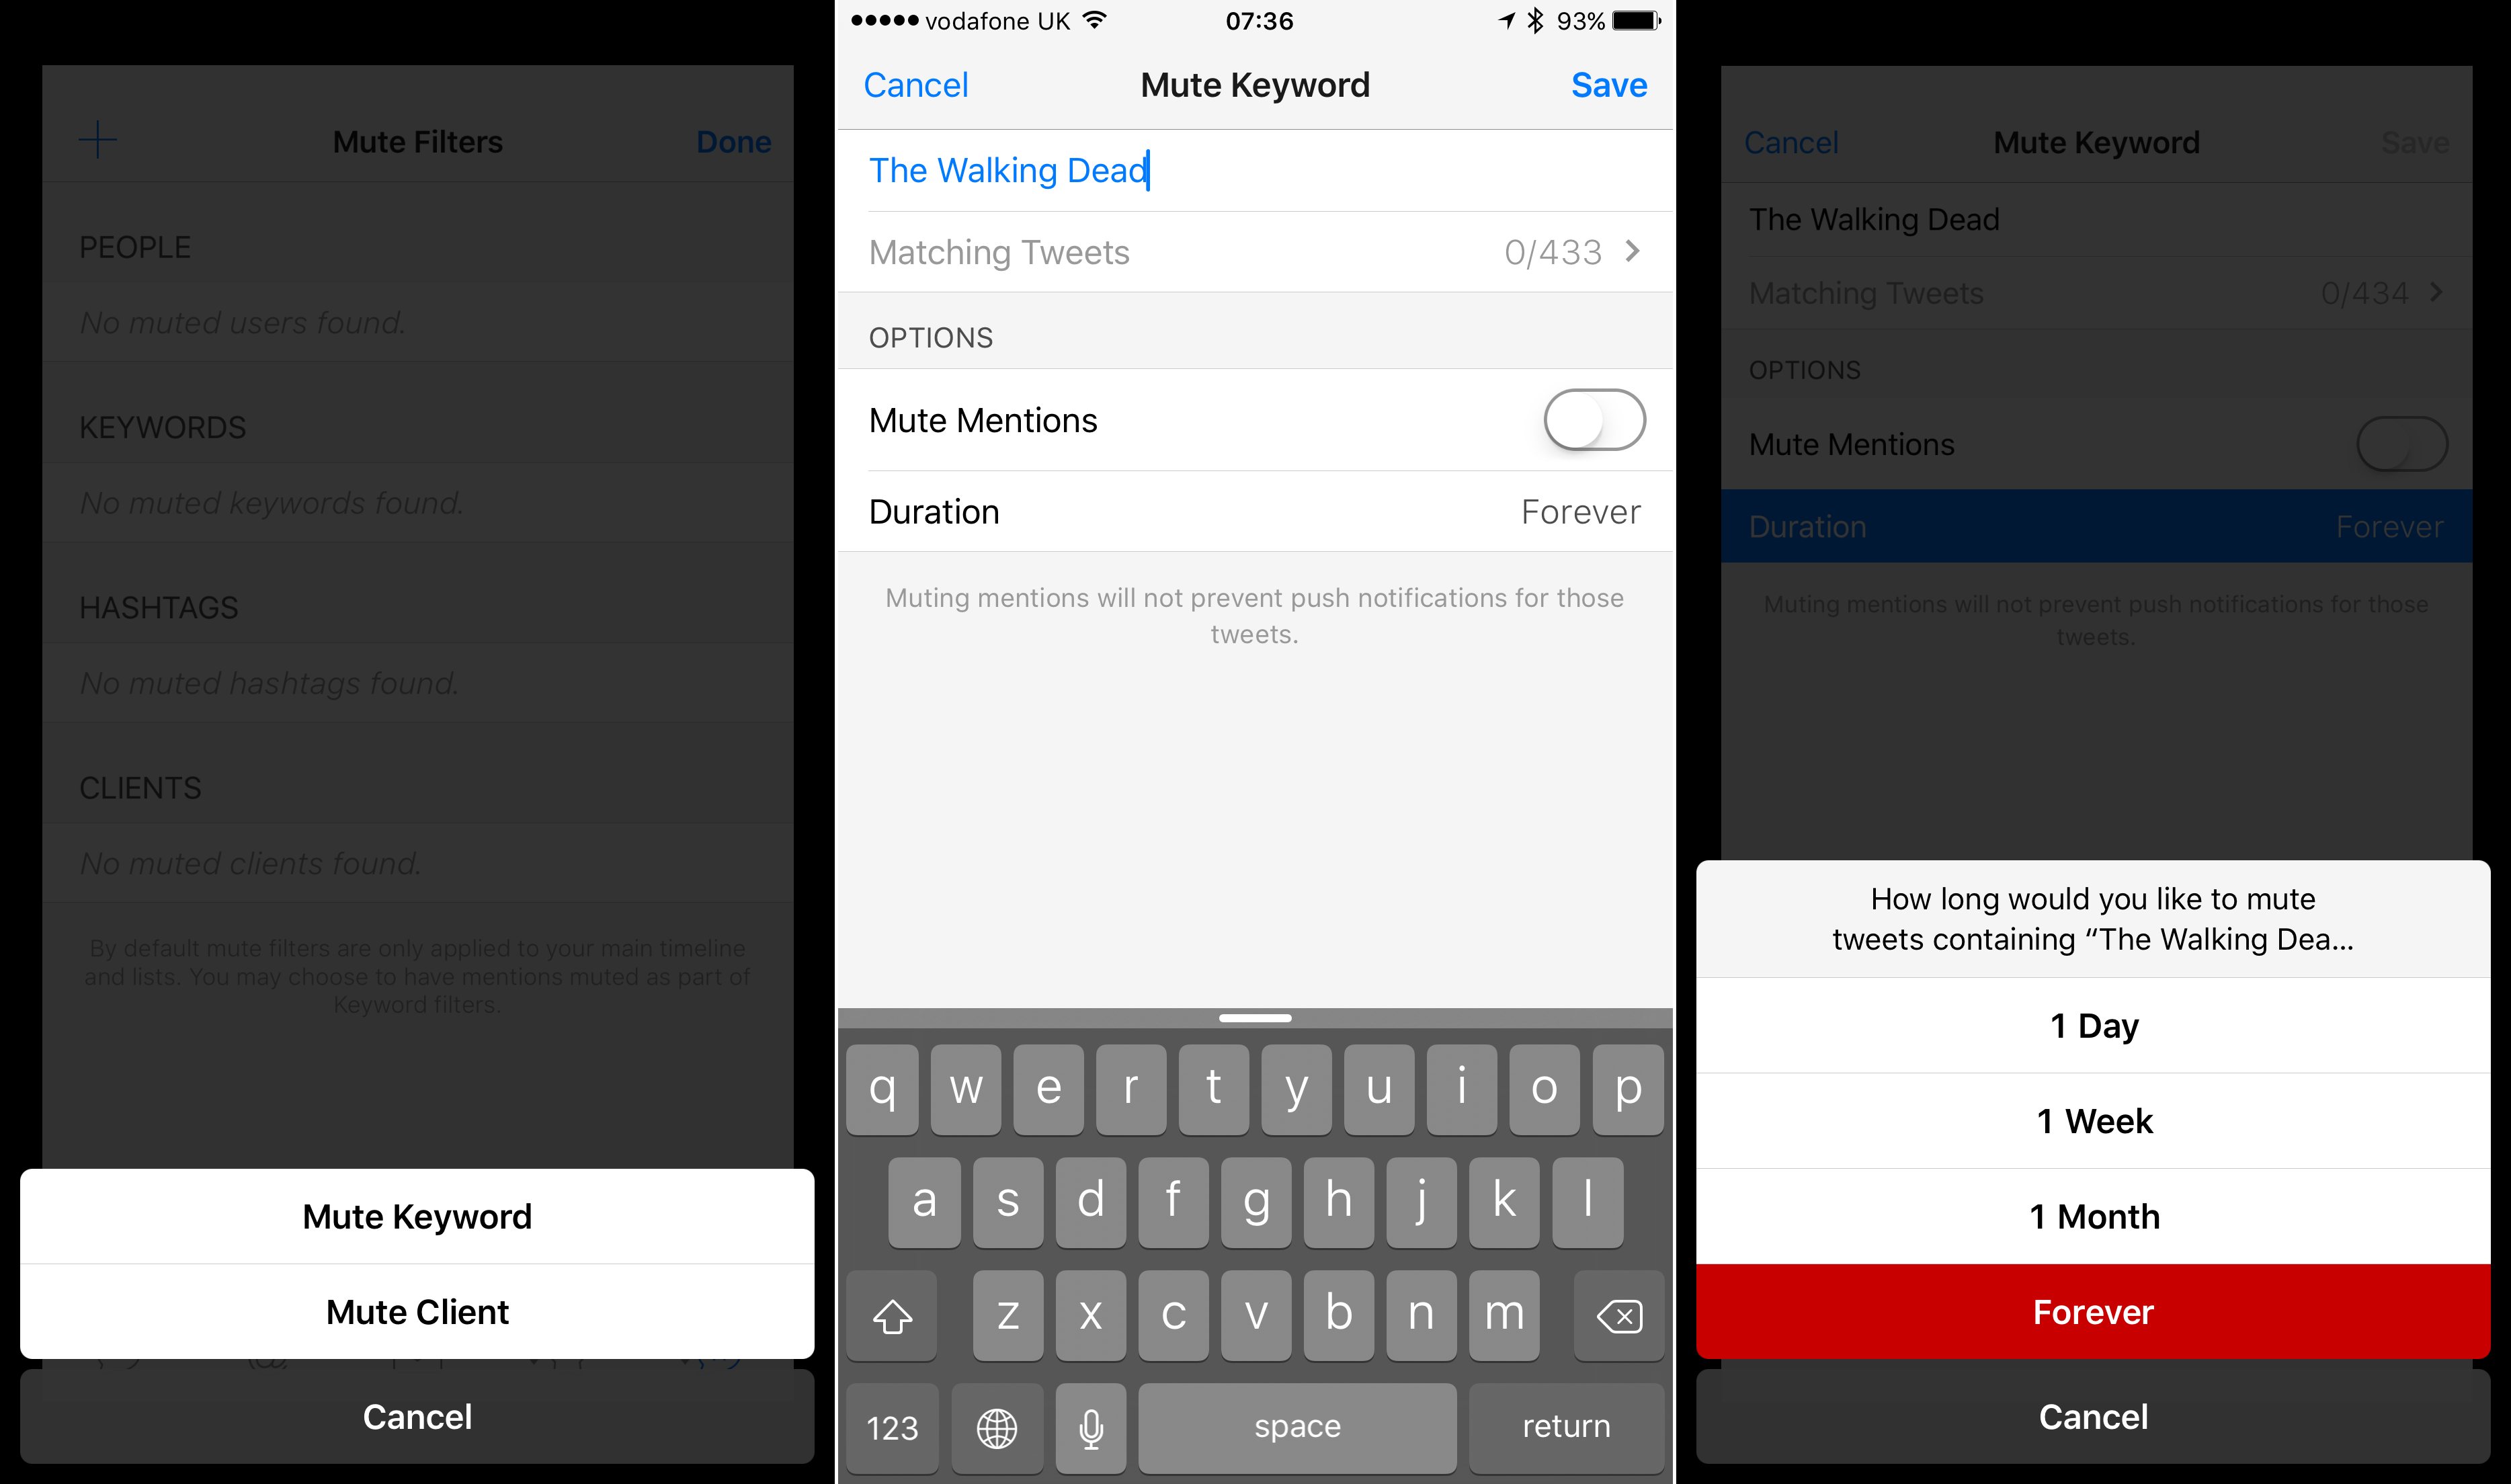 You'll need to choose your keywords carefully in order for Tweetbot's mute filters to work. 